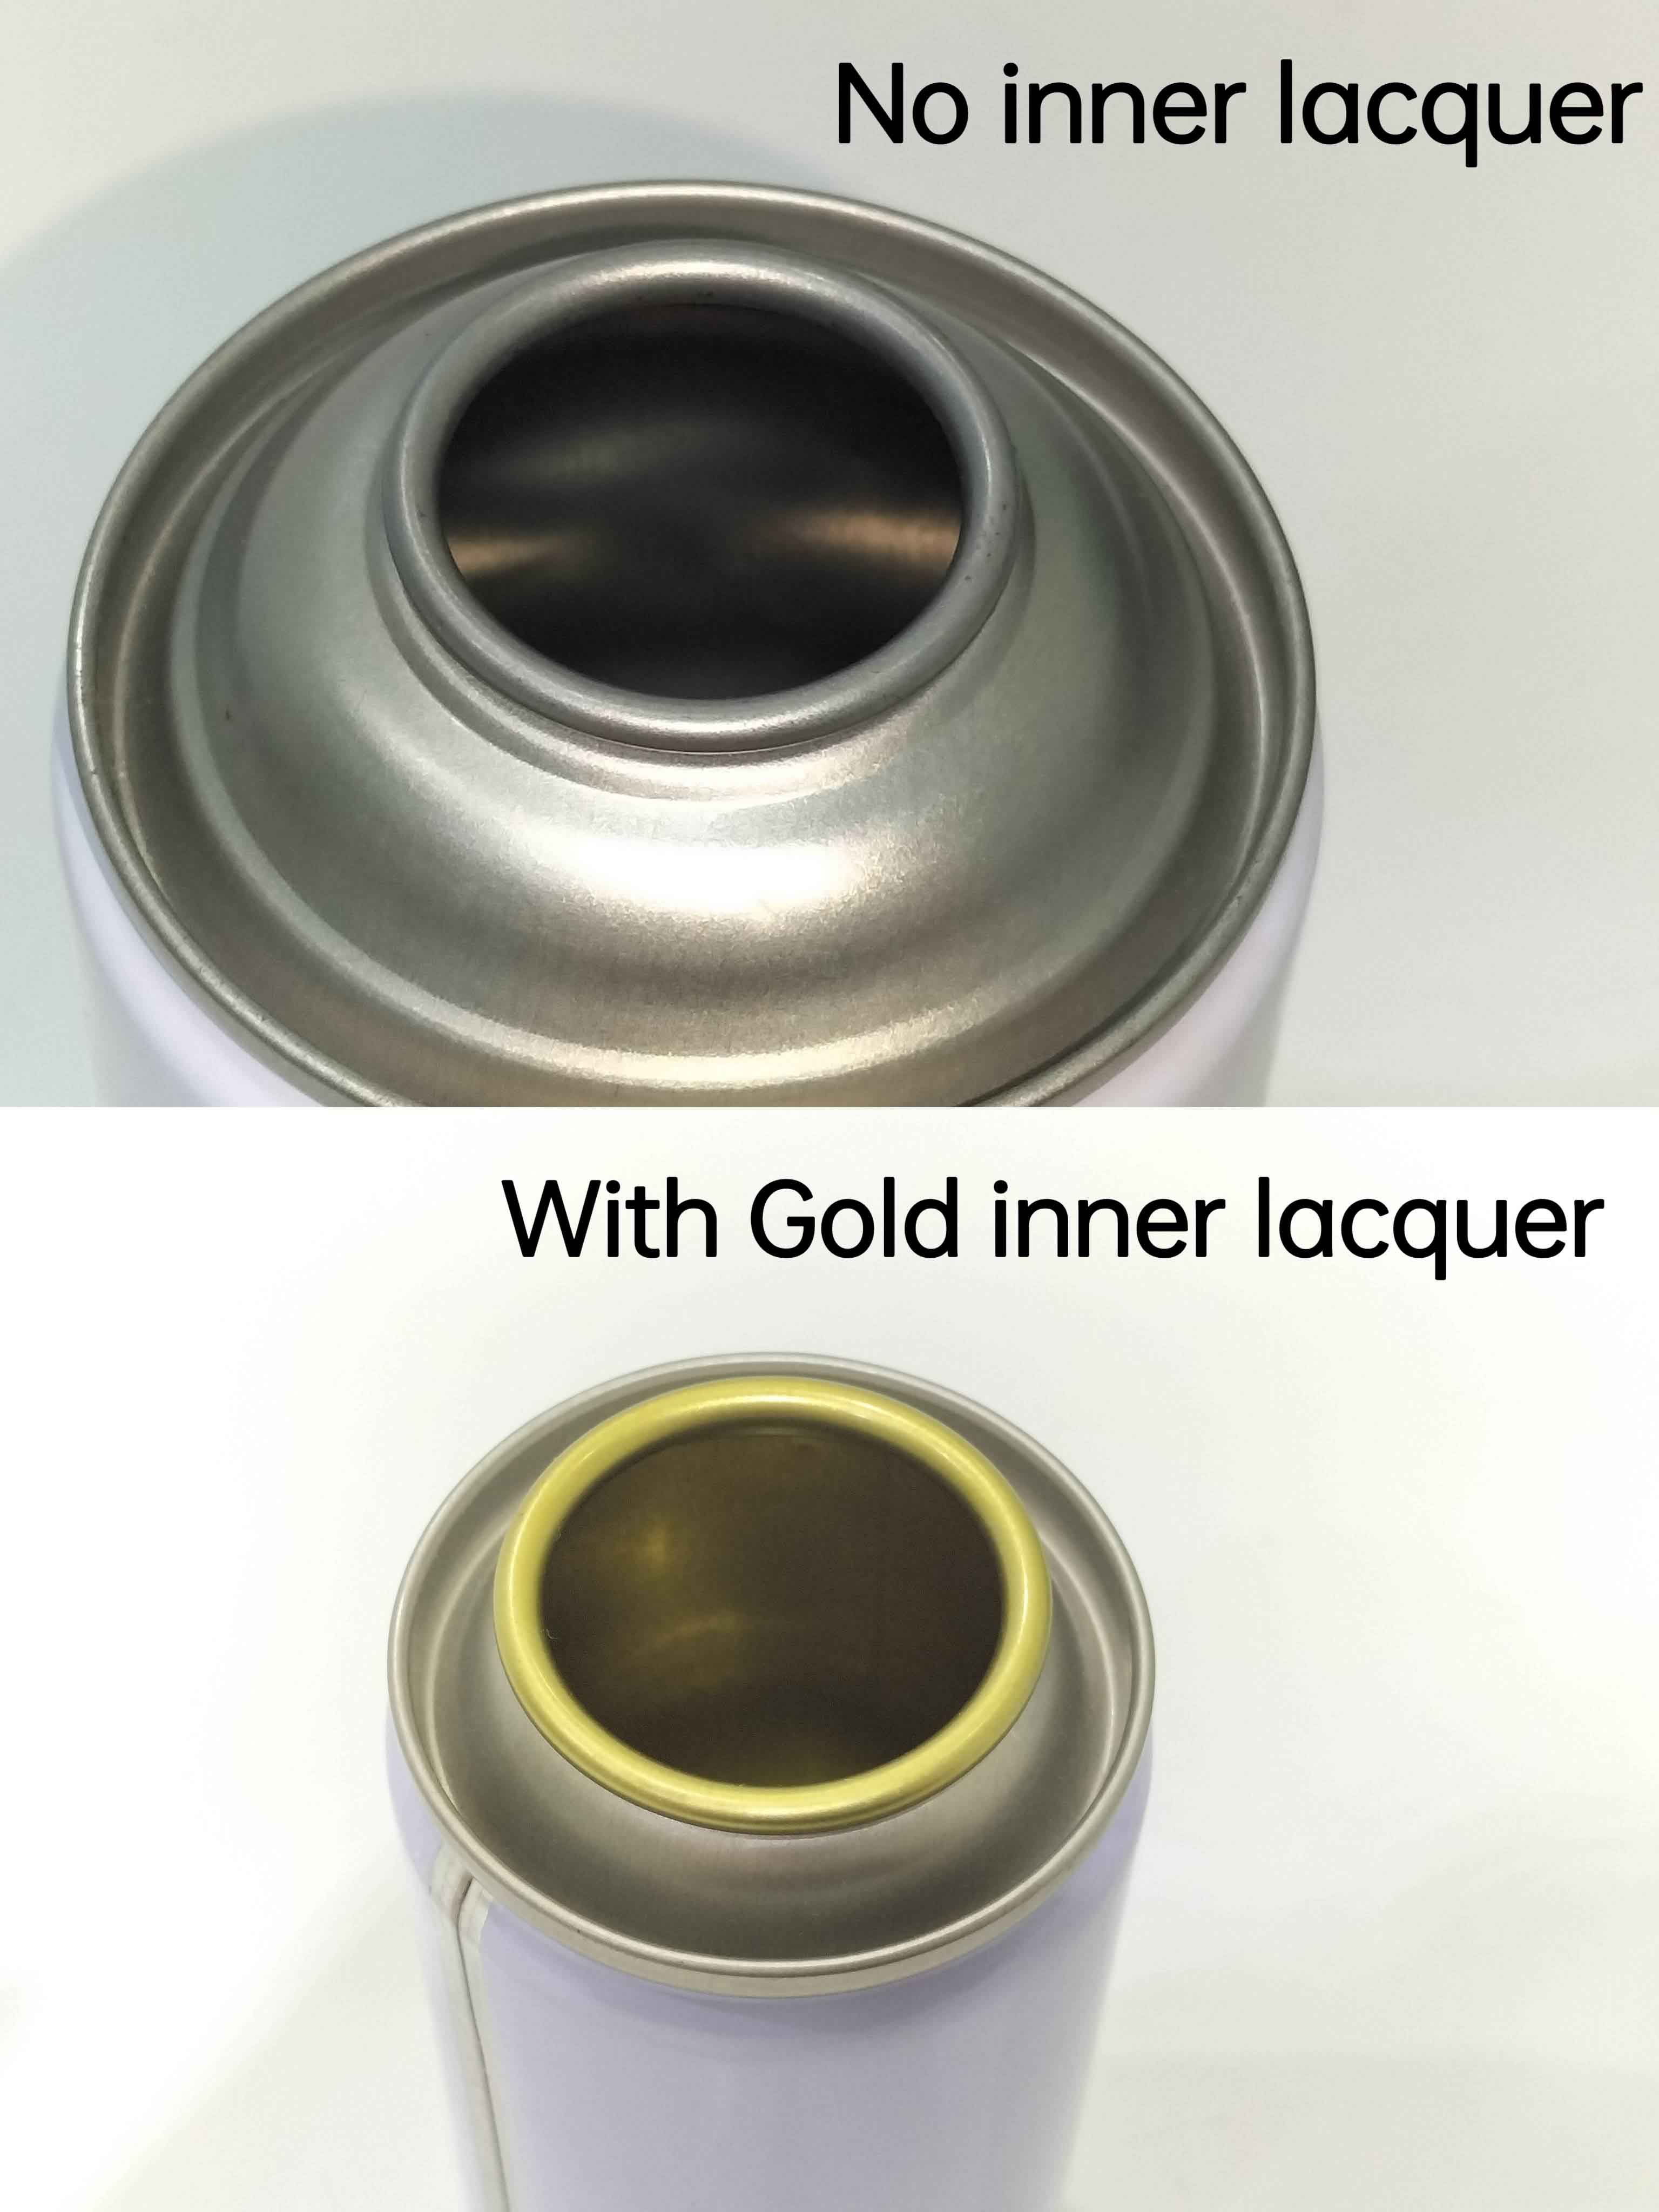 aerosol can with inner lacquer